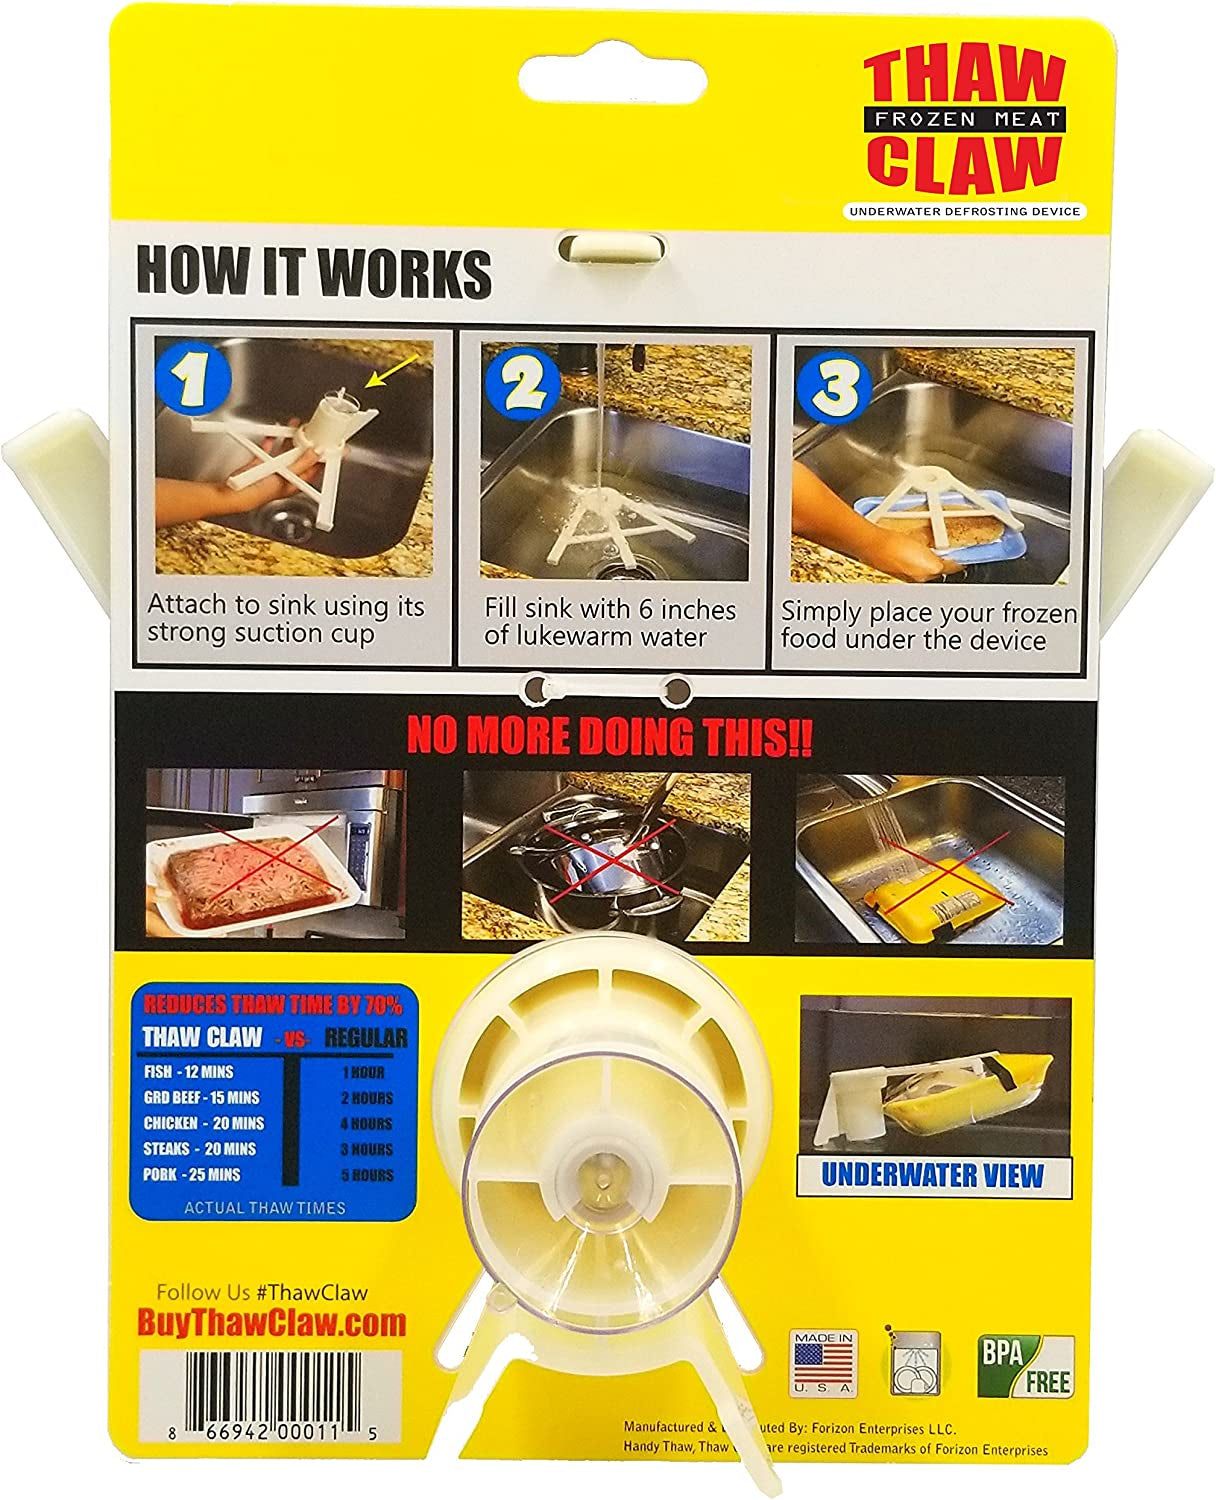 Helps Thaw Frozen Meat 7X Faster & 100% Safer - Thaws in Minutes Instead of Hours - Your Favorite New Kitchen Gadget!